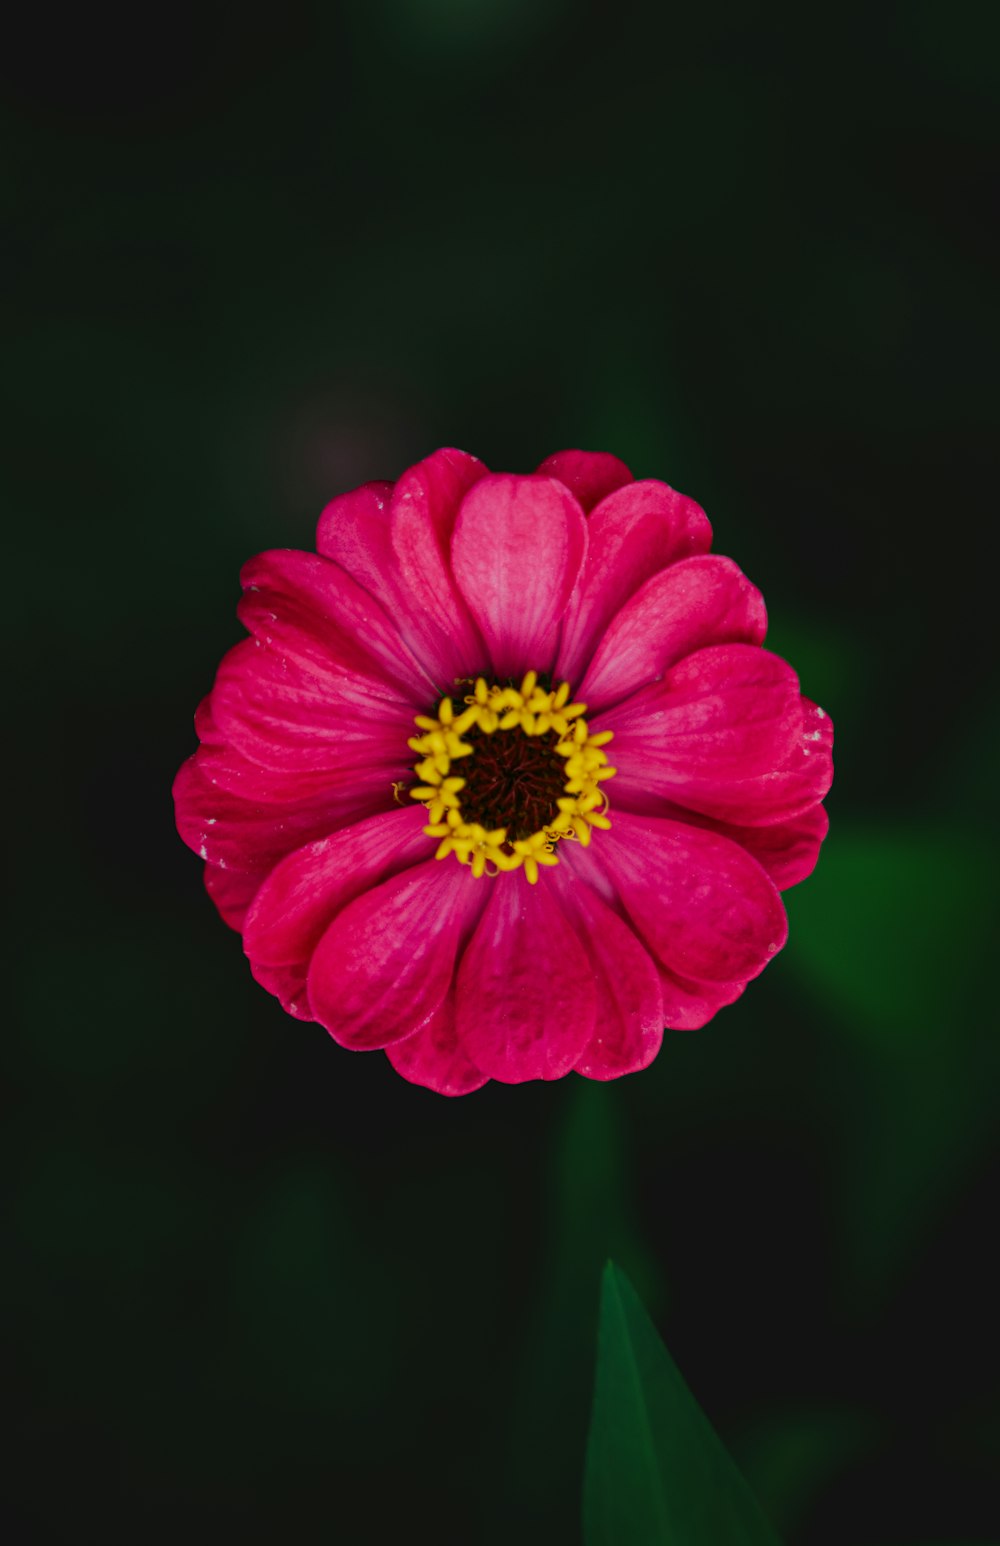 a bright pink flower with a yellow center